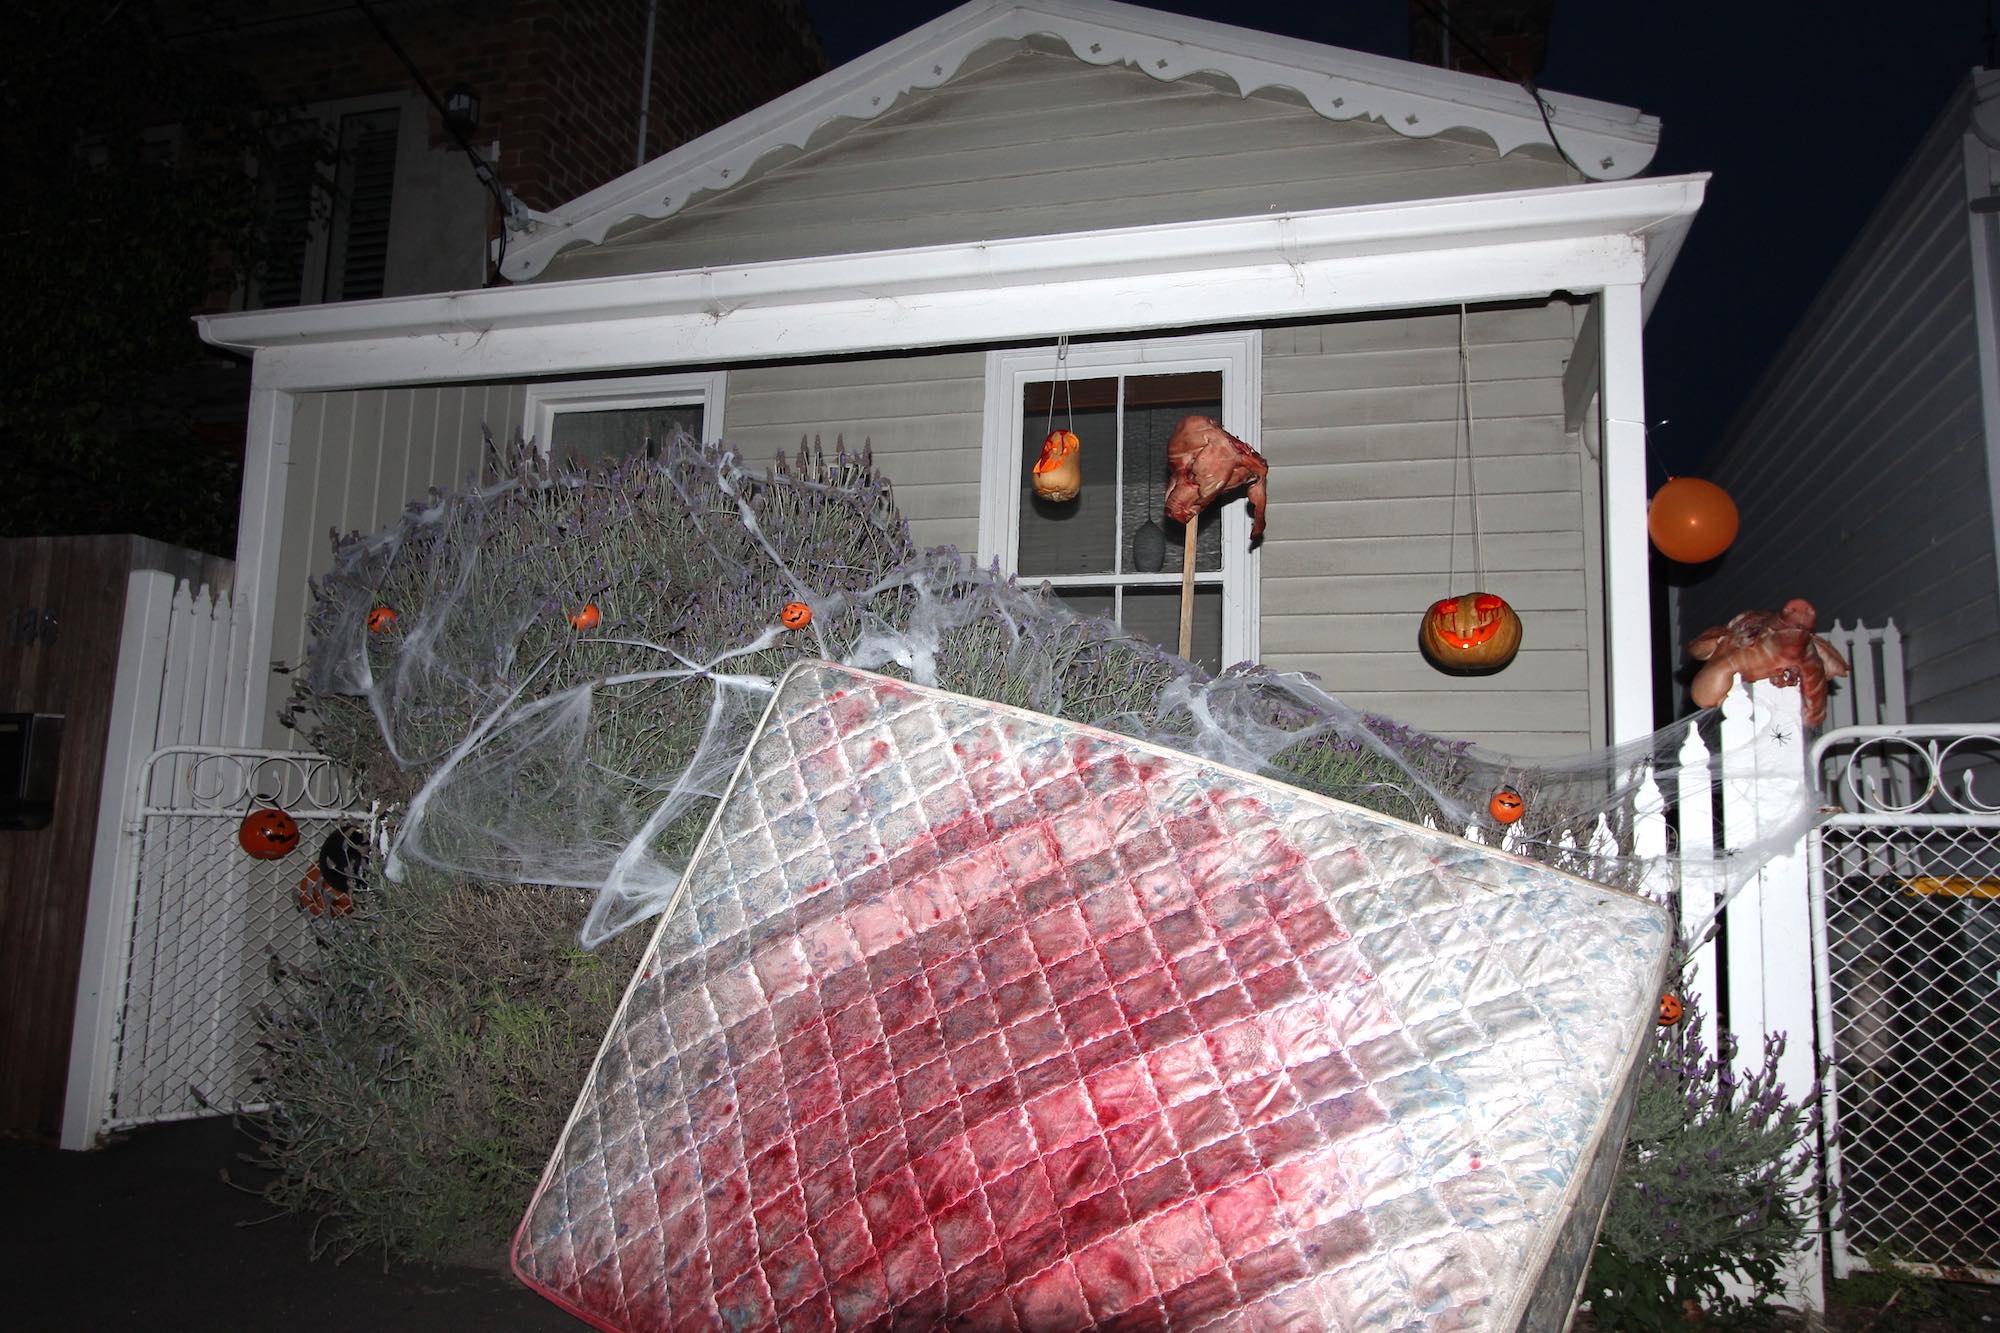 Halloween decorations get gory, and some prefer to dial it down